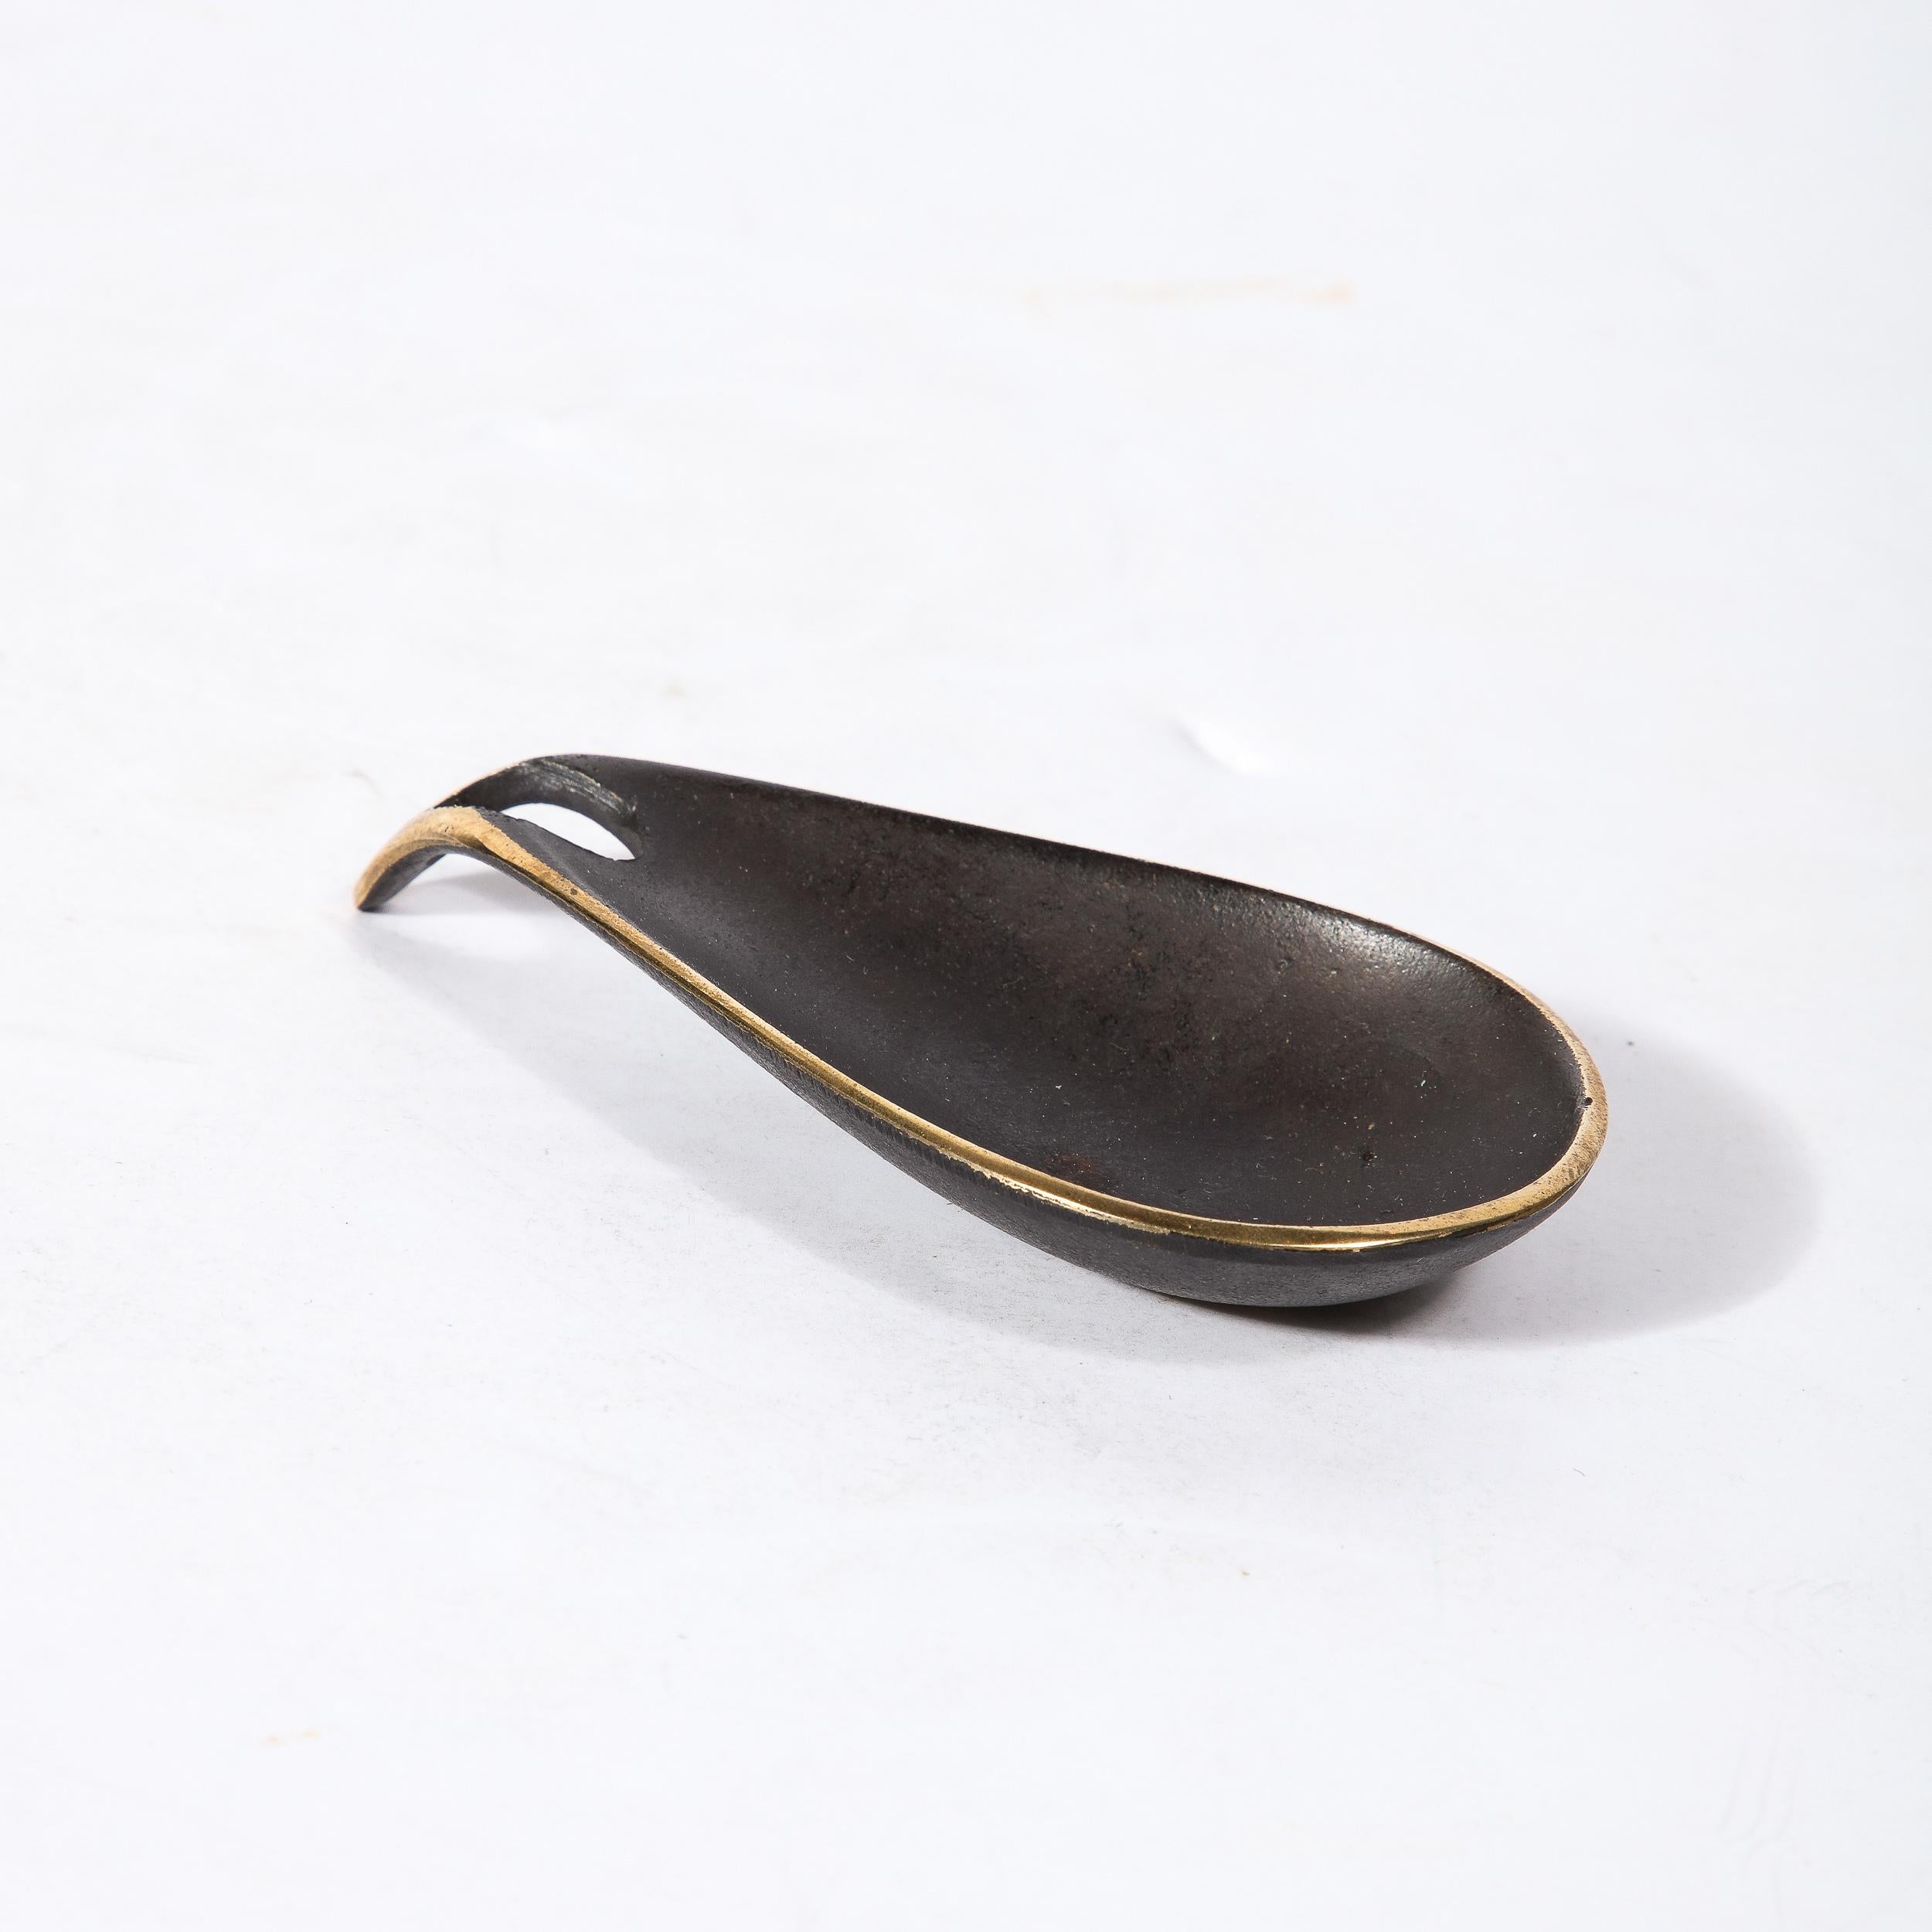 This beautifully designed Mid-Century Modernist patinated brassl Teardrop Dish was made by the esteemed artist Carl Aubock and originates from Austria, Circa 1950. Featuring a construction in black patination with exposed polished brass